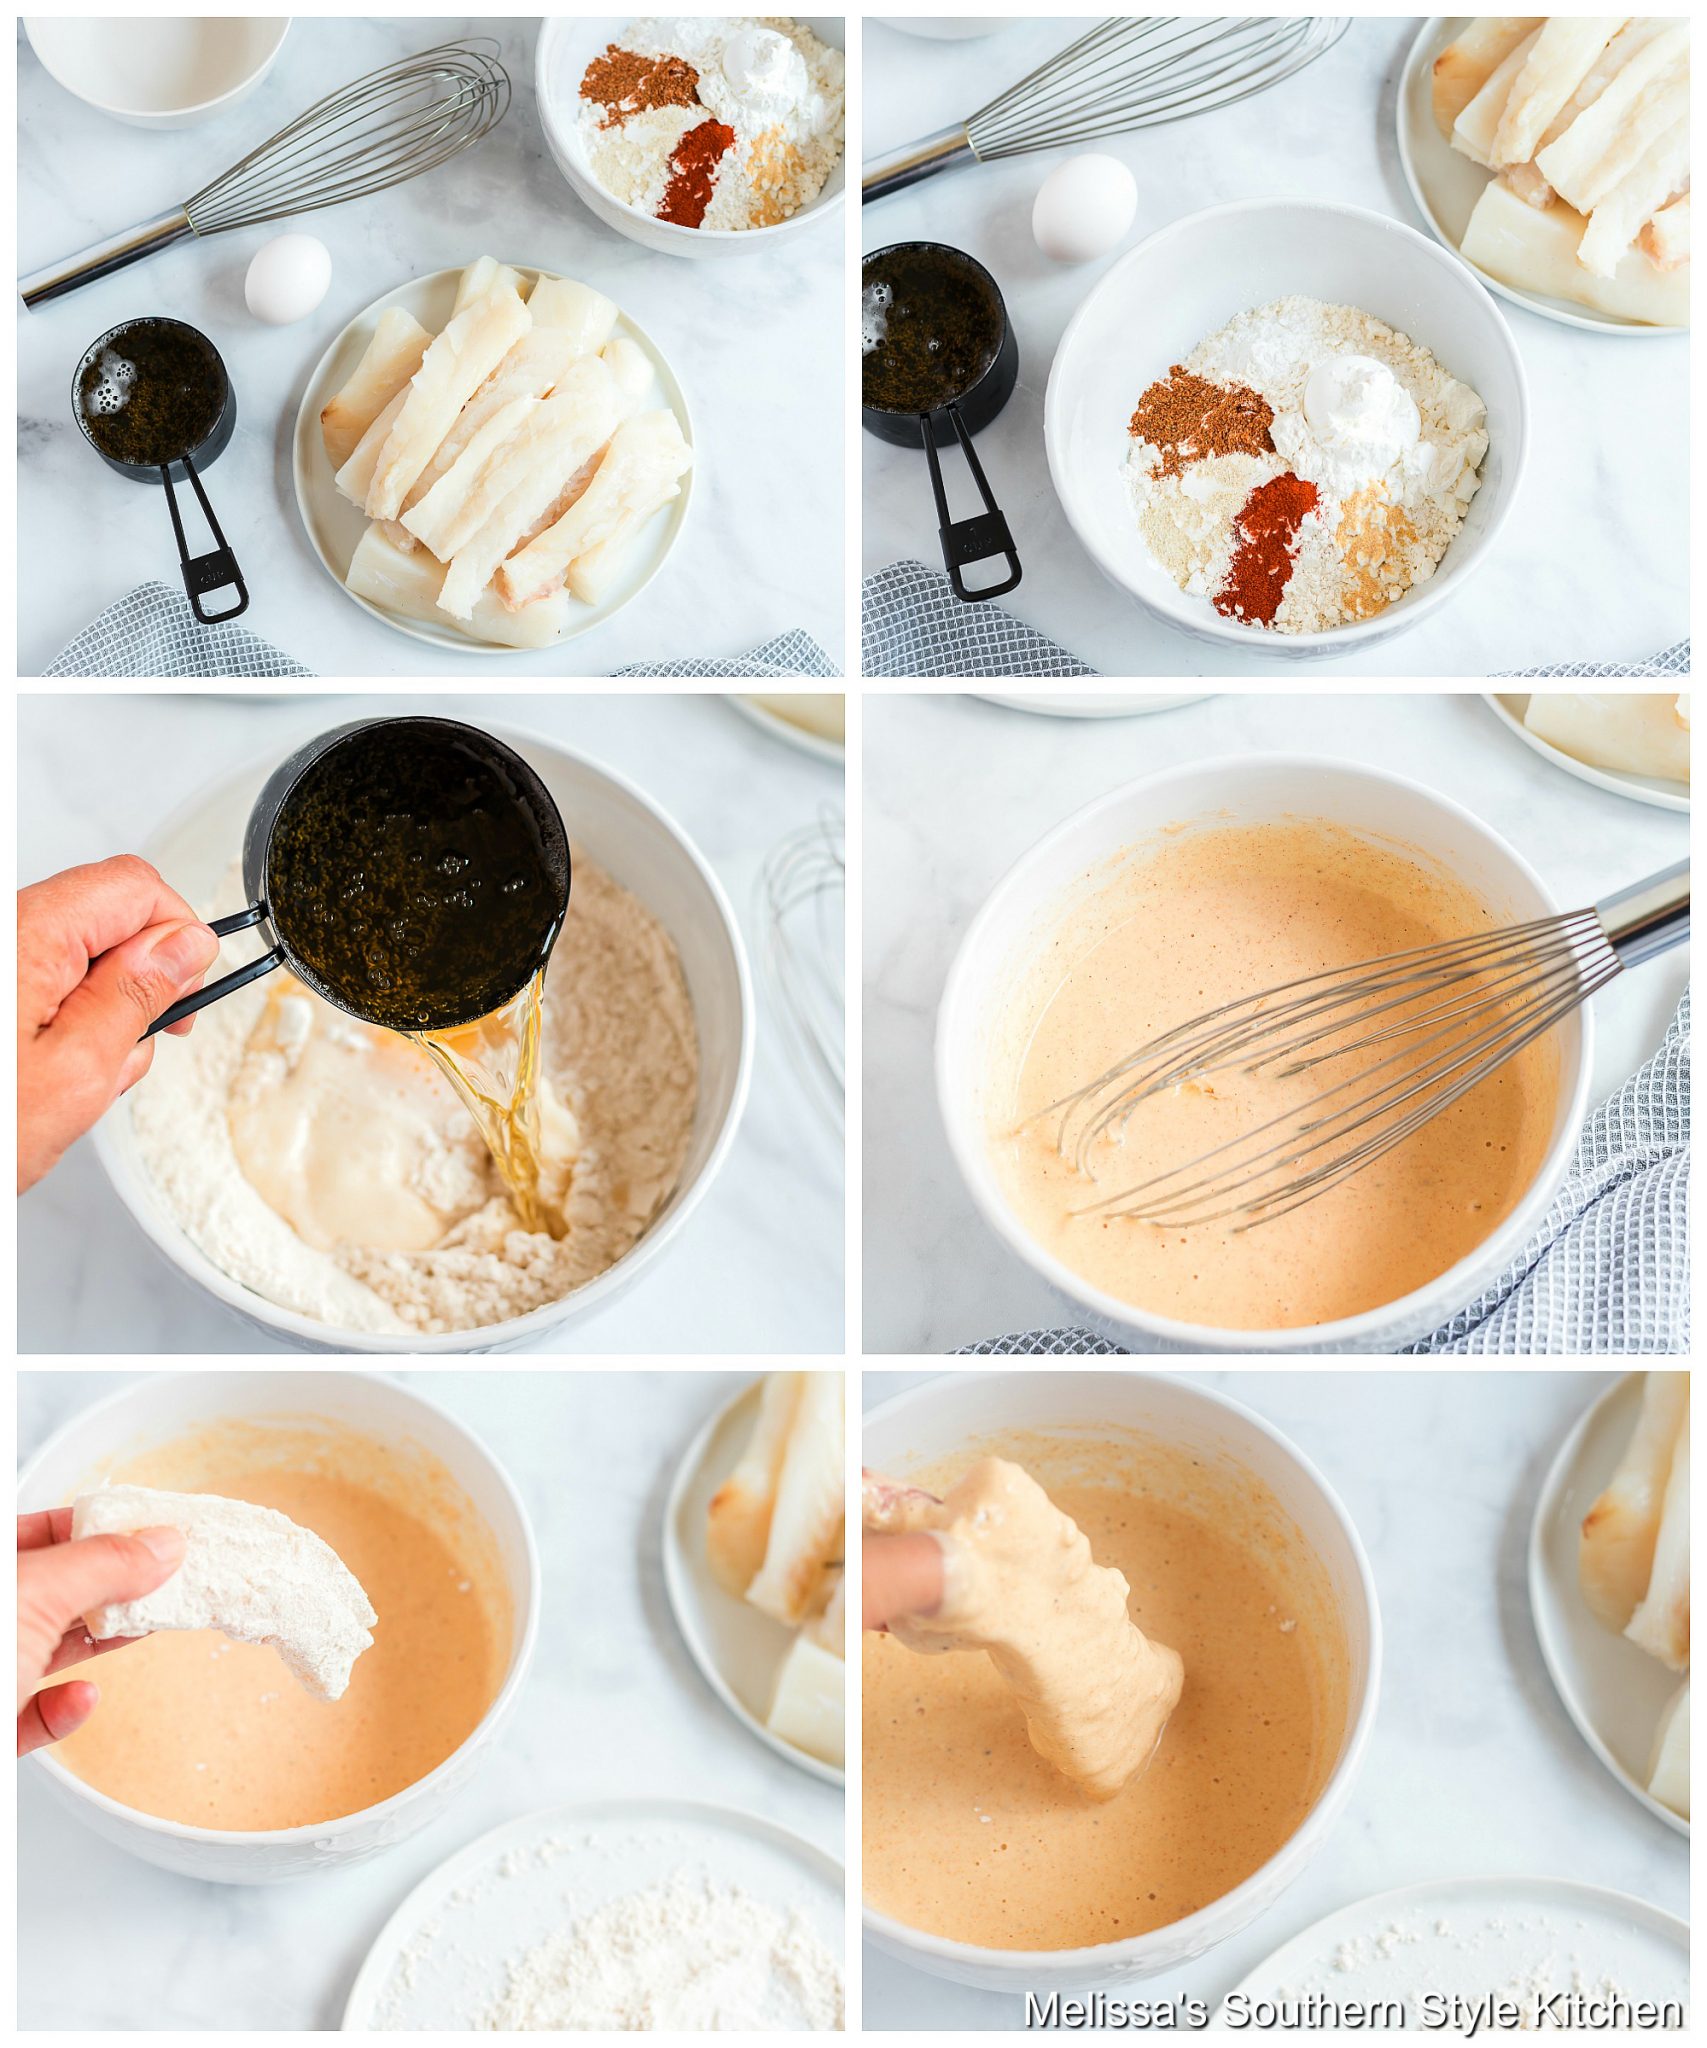 Step-by-step preparation images and ingredients for fried fish